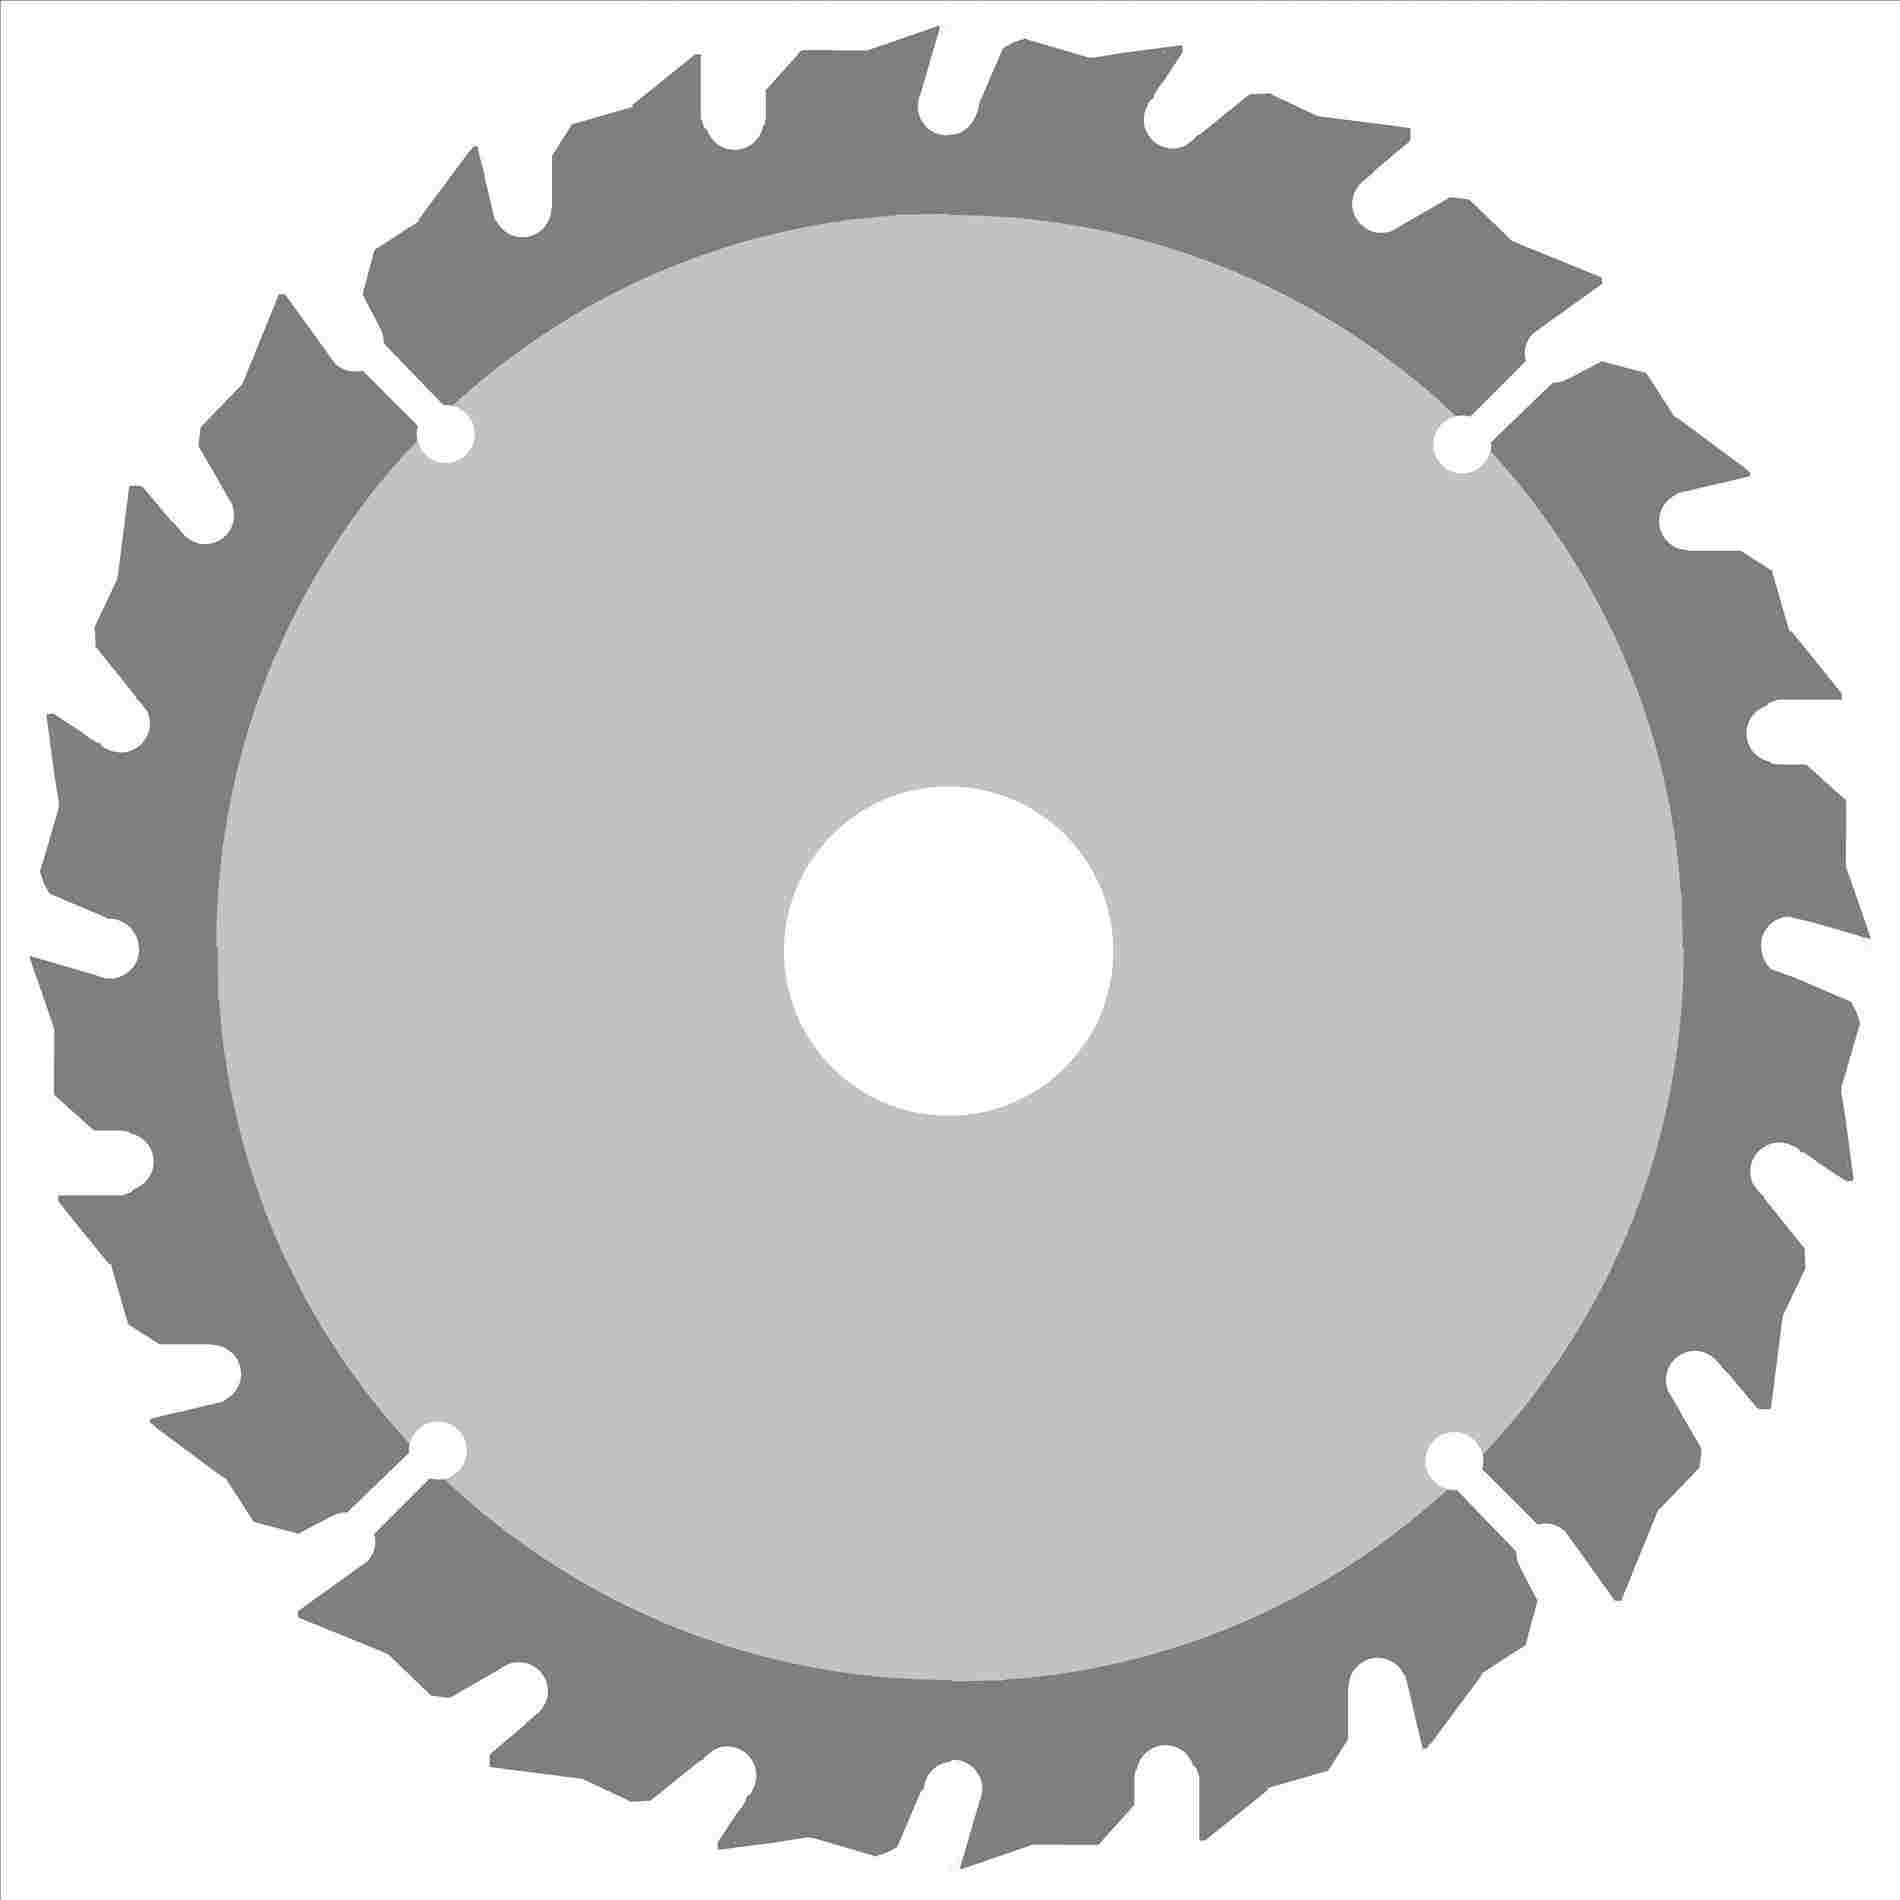 Saw Blade Drawing | Free download on ClipArtMag